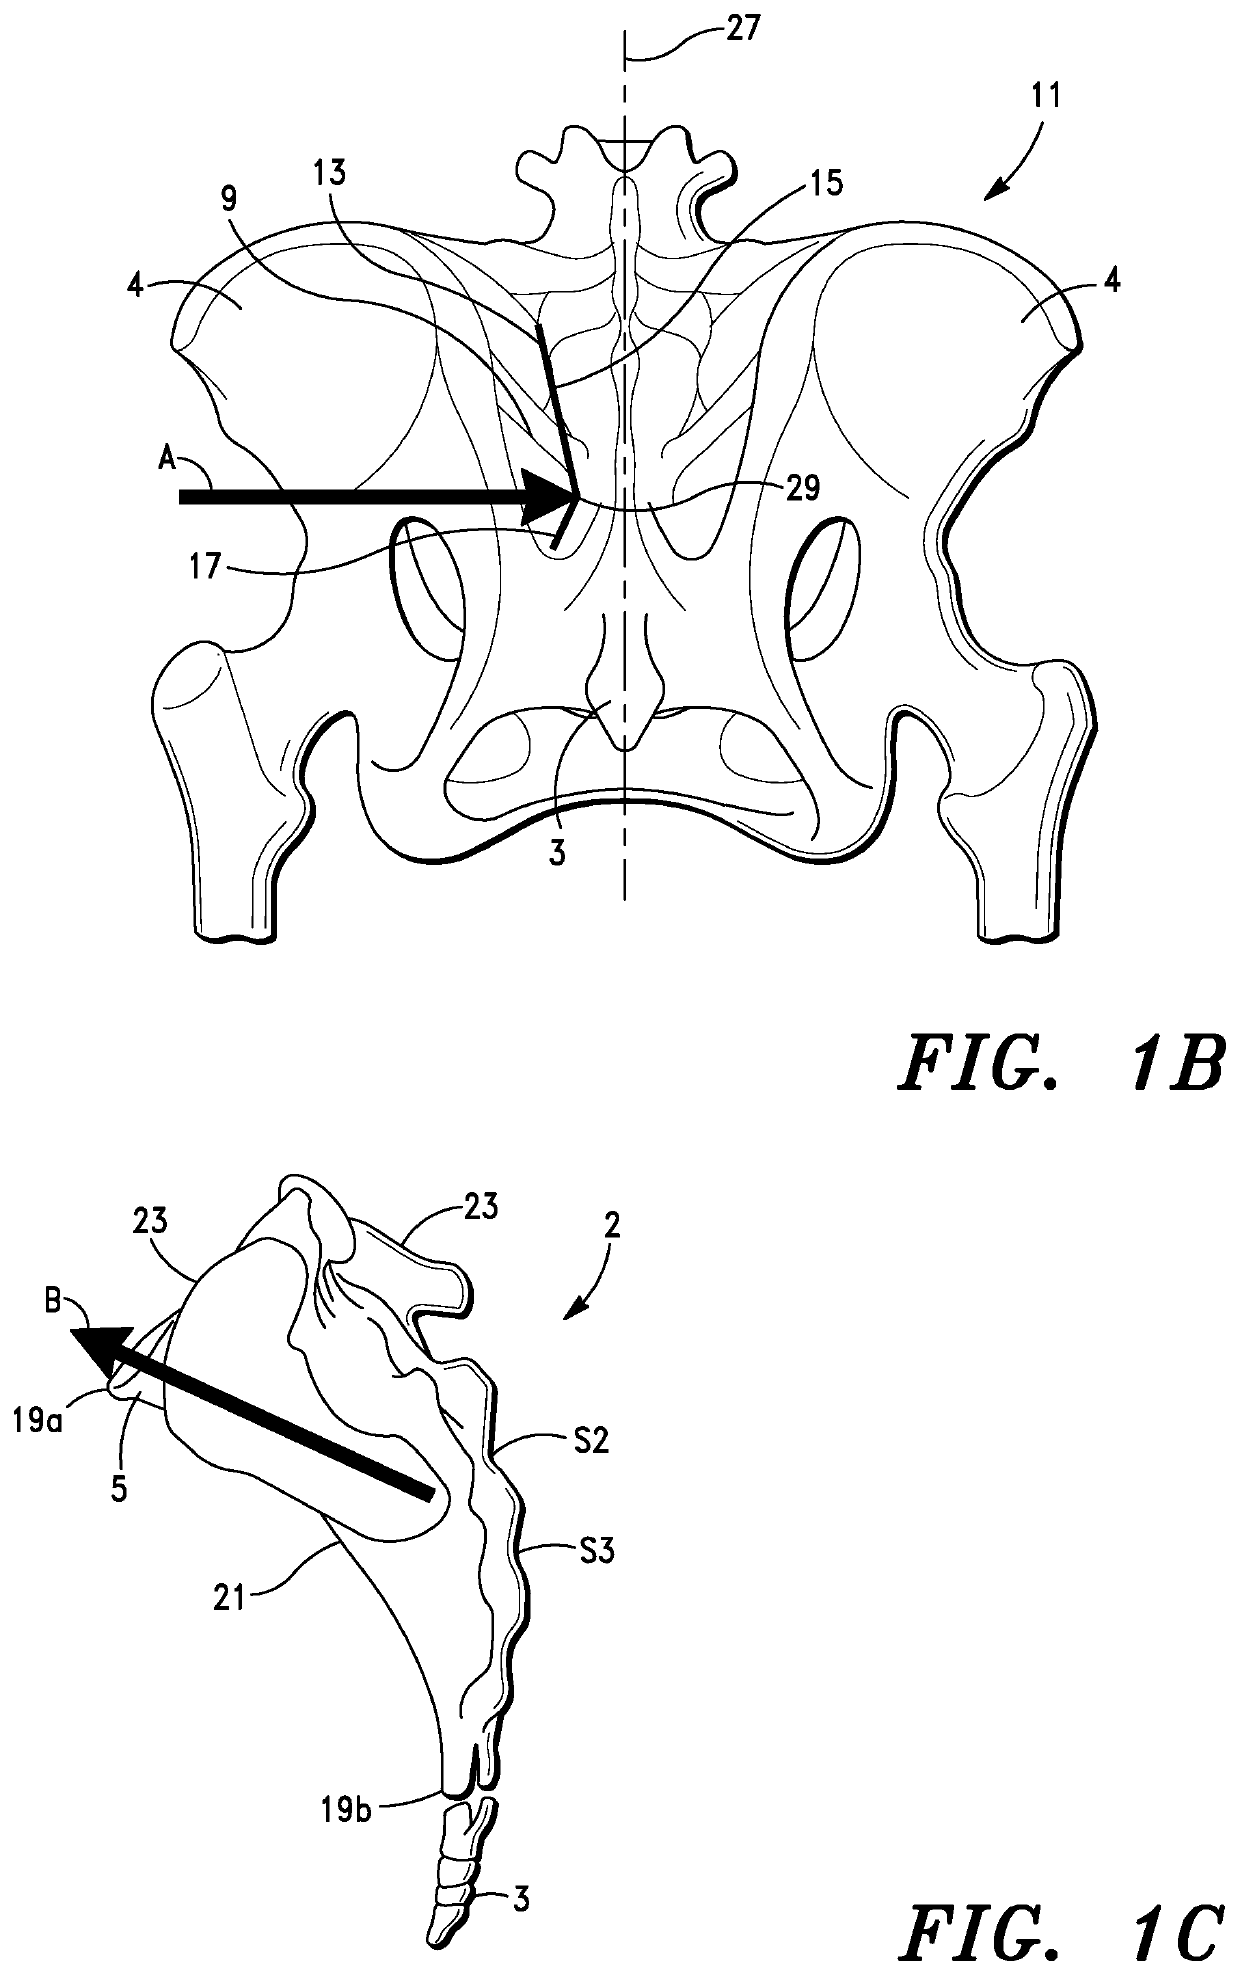 Systems for Sacroiliac Joint Stabilization